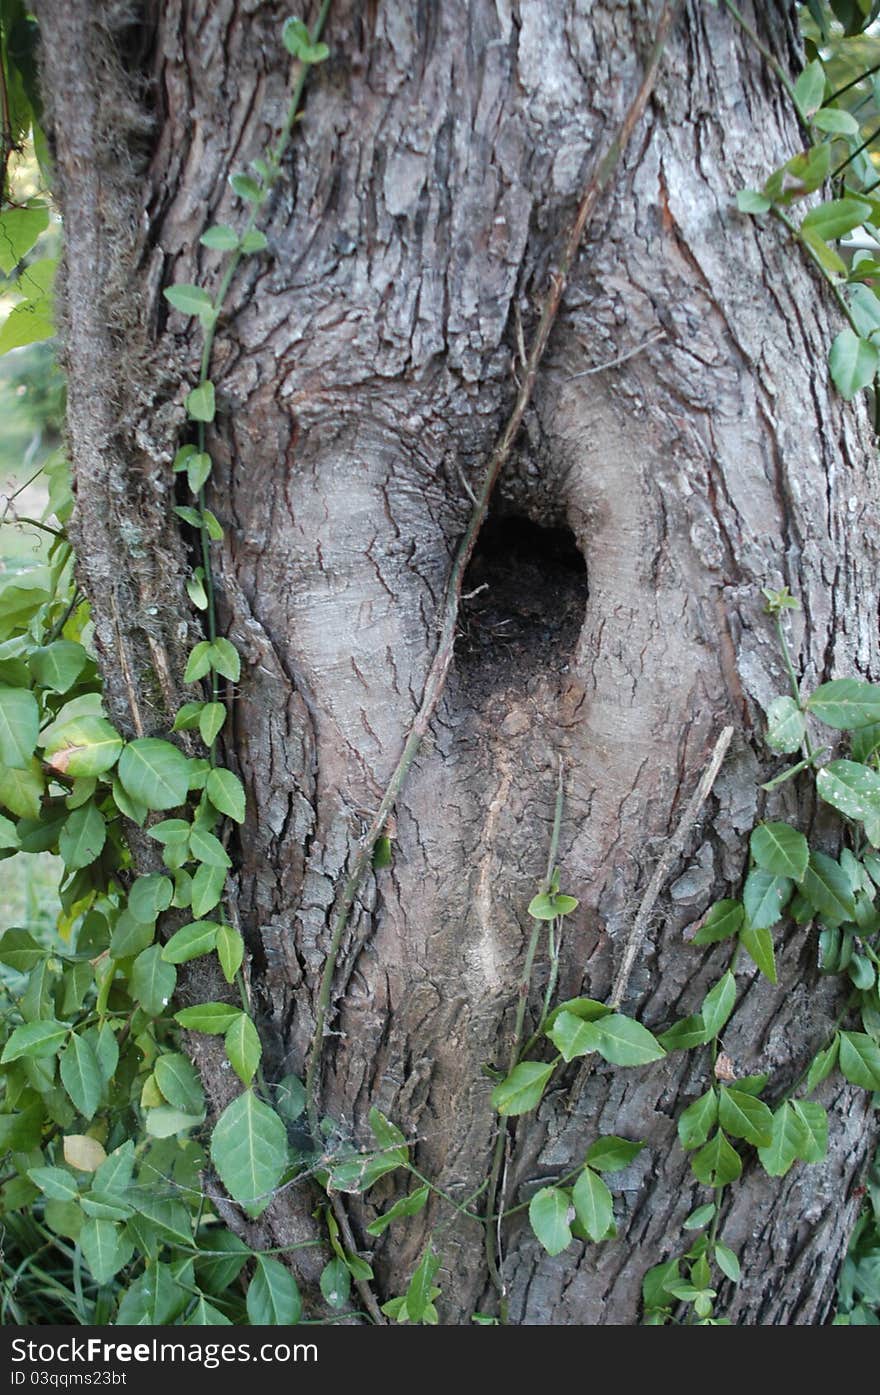 An odd old tree with a strange hole in front. An odd old tree with a strange hole in front